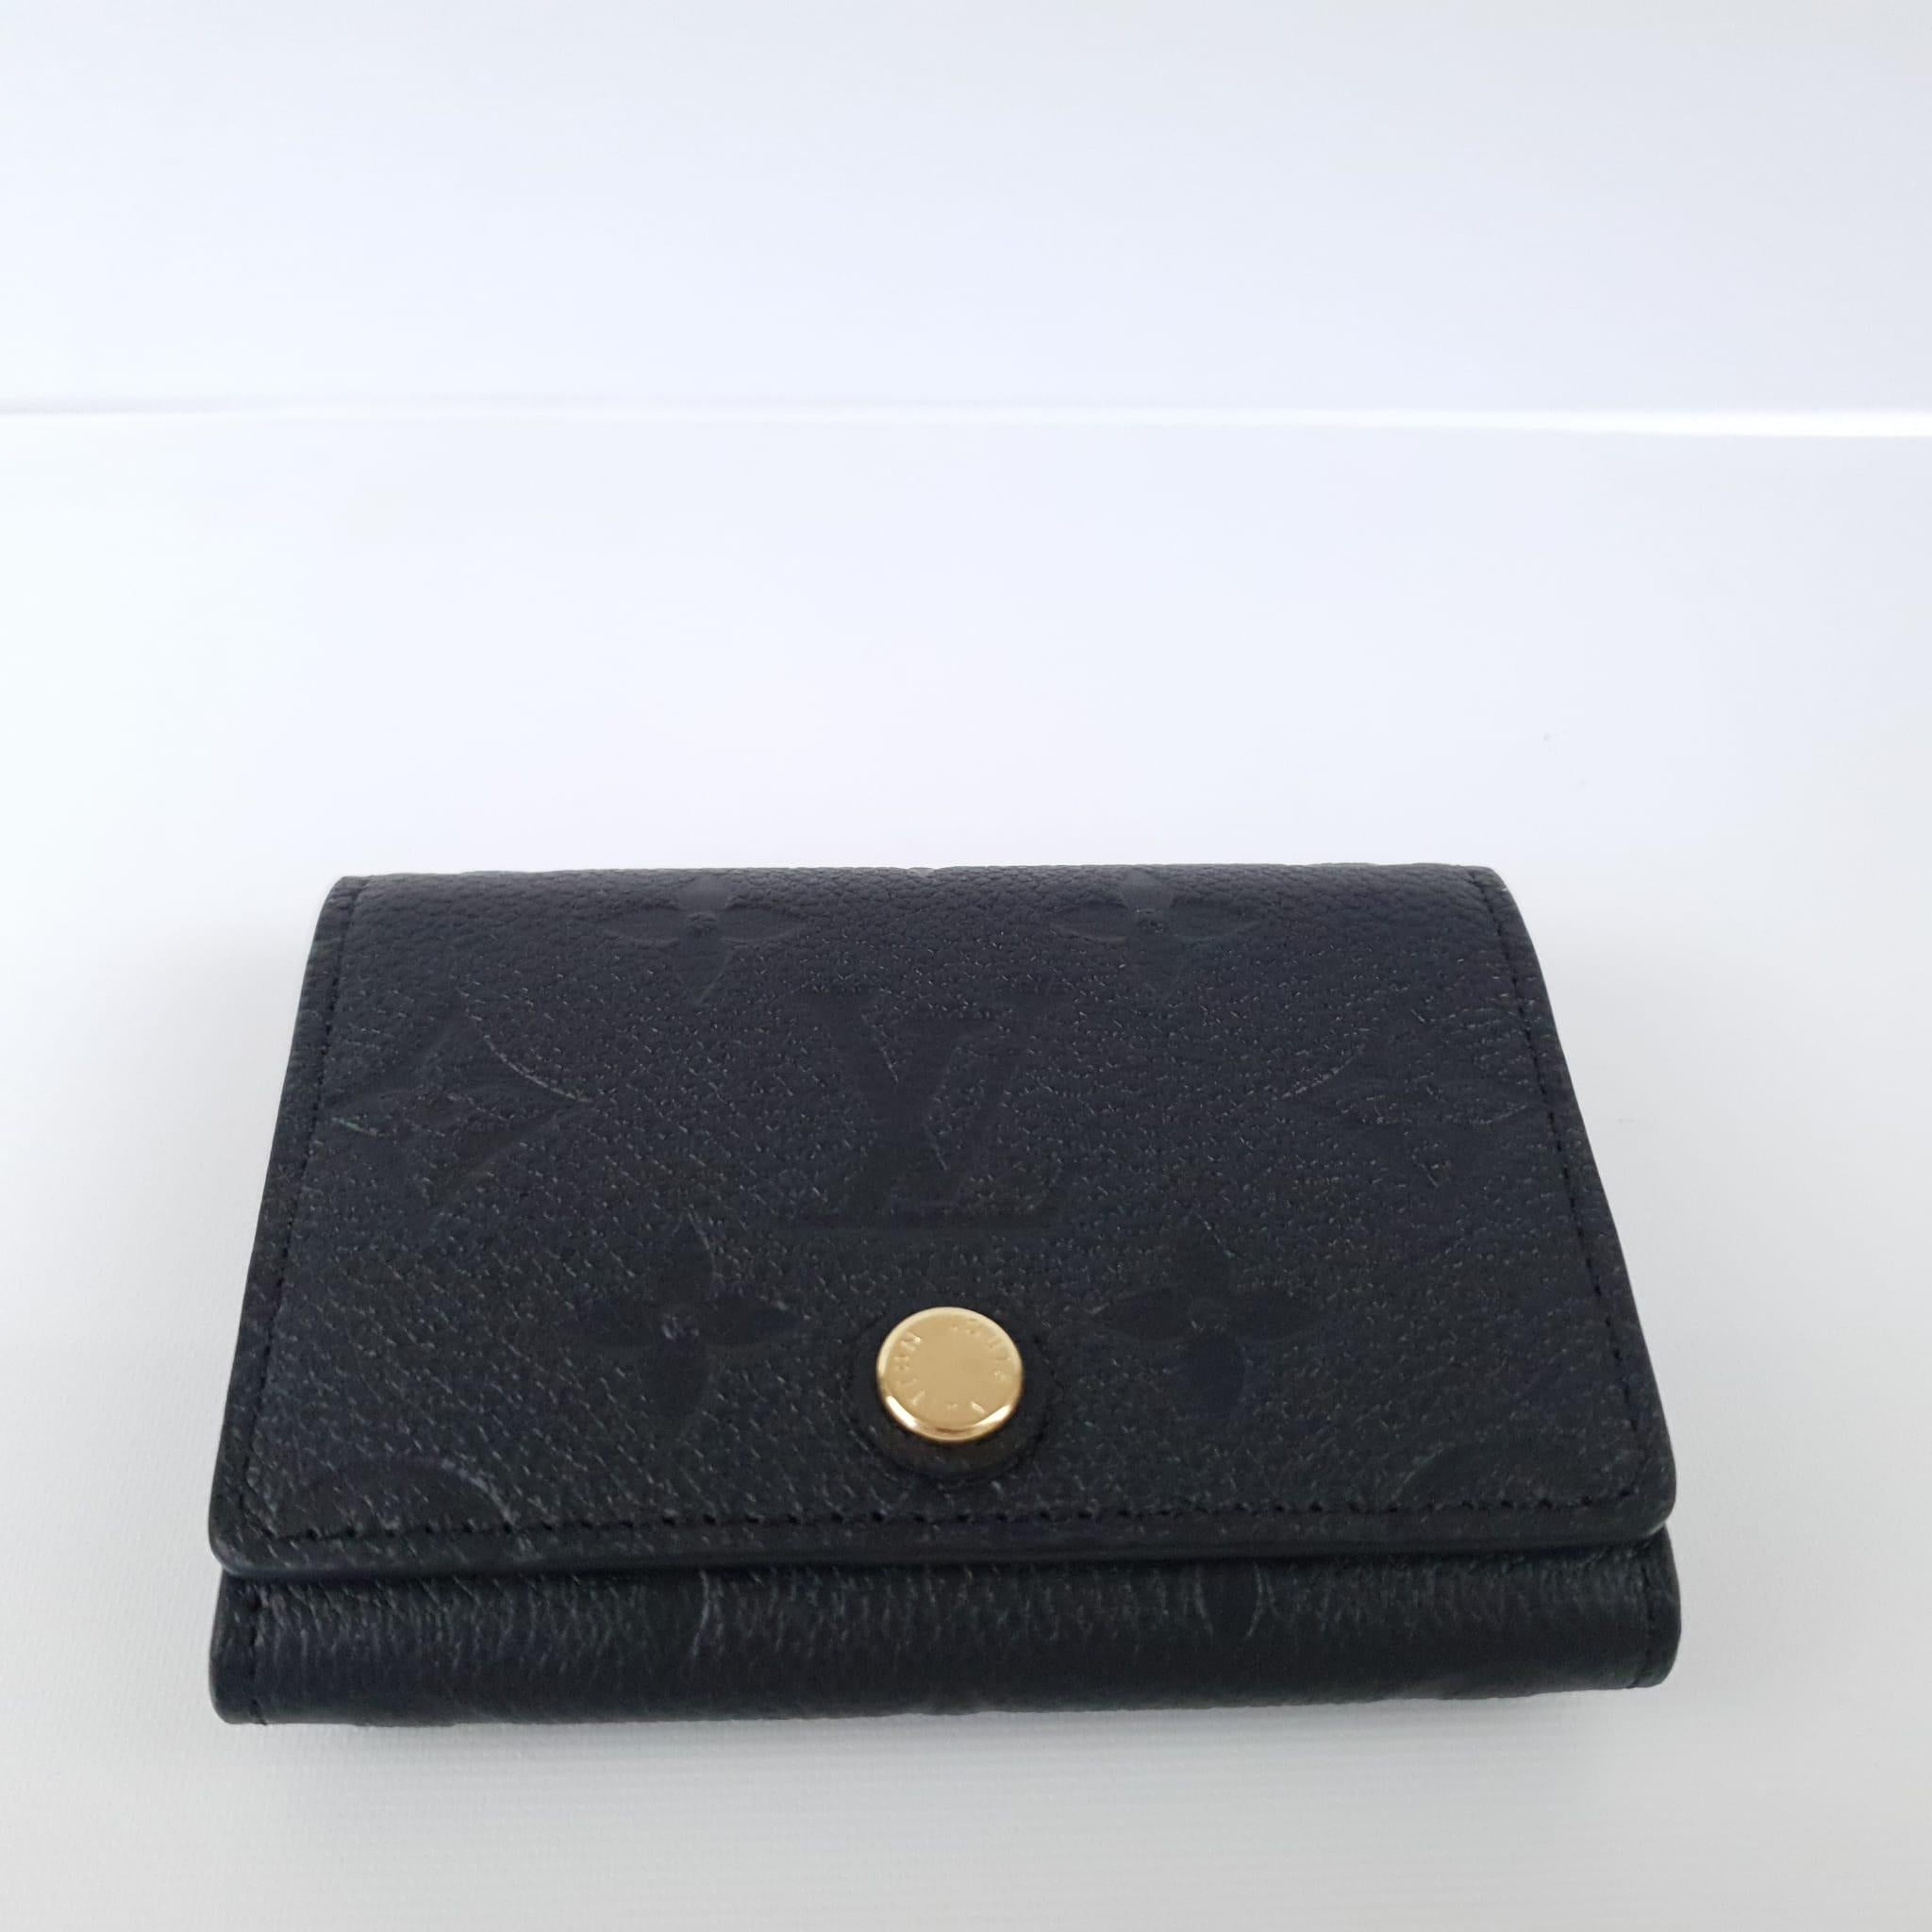 Black
Monogram Empreinte embossed supple grained cowhide leather
Grained cowhide leather lining
Gold metallic finishes
Snap button closure
Card slot
Gusseted compartment